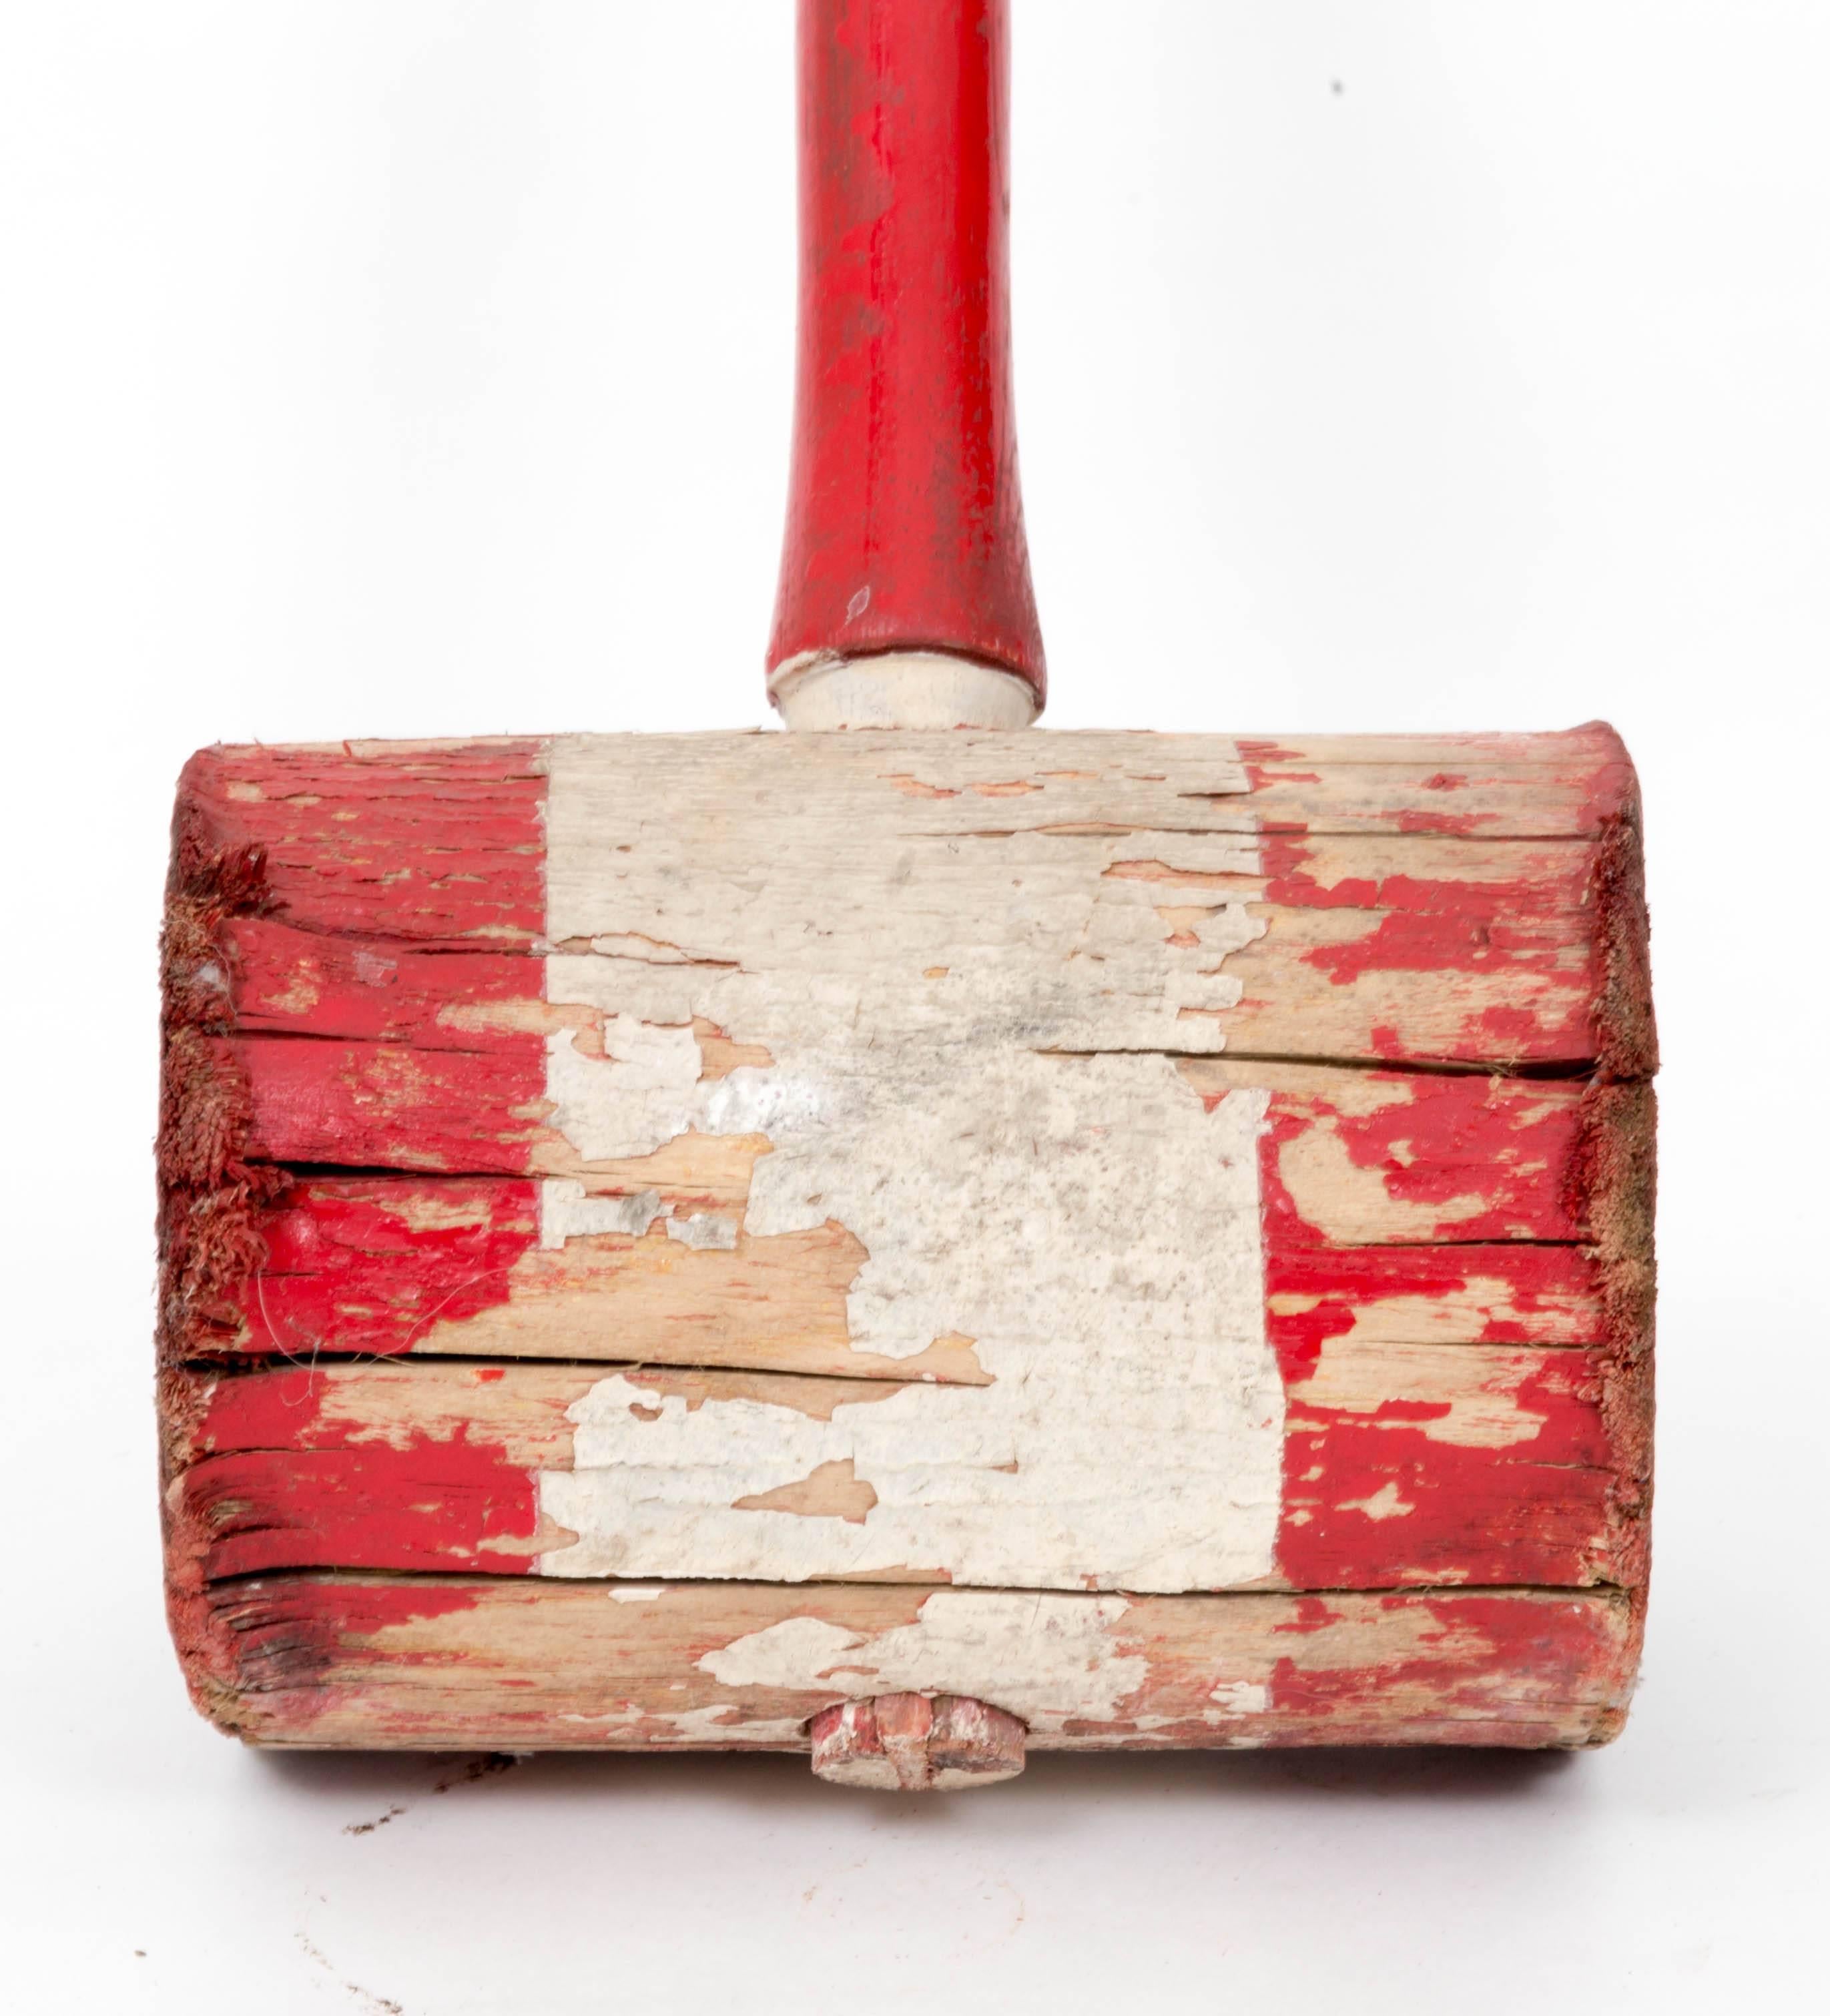 Large carnival strong man's mallet from Coney Island, rare with original paint.